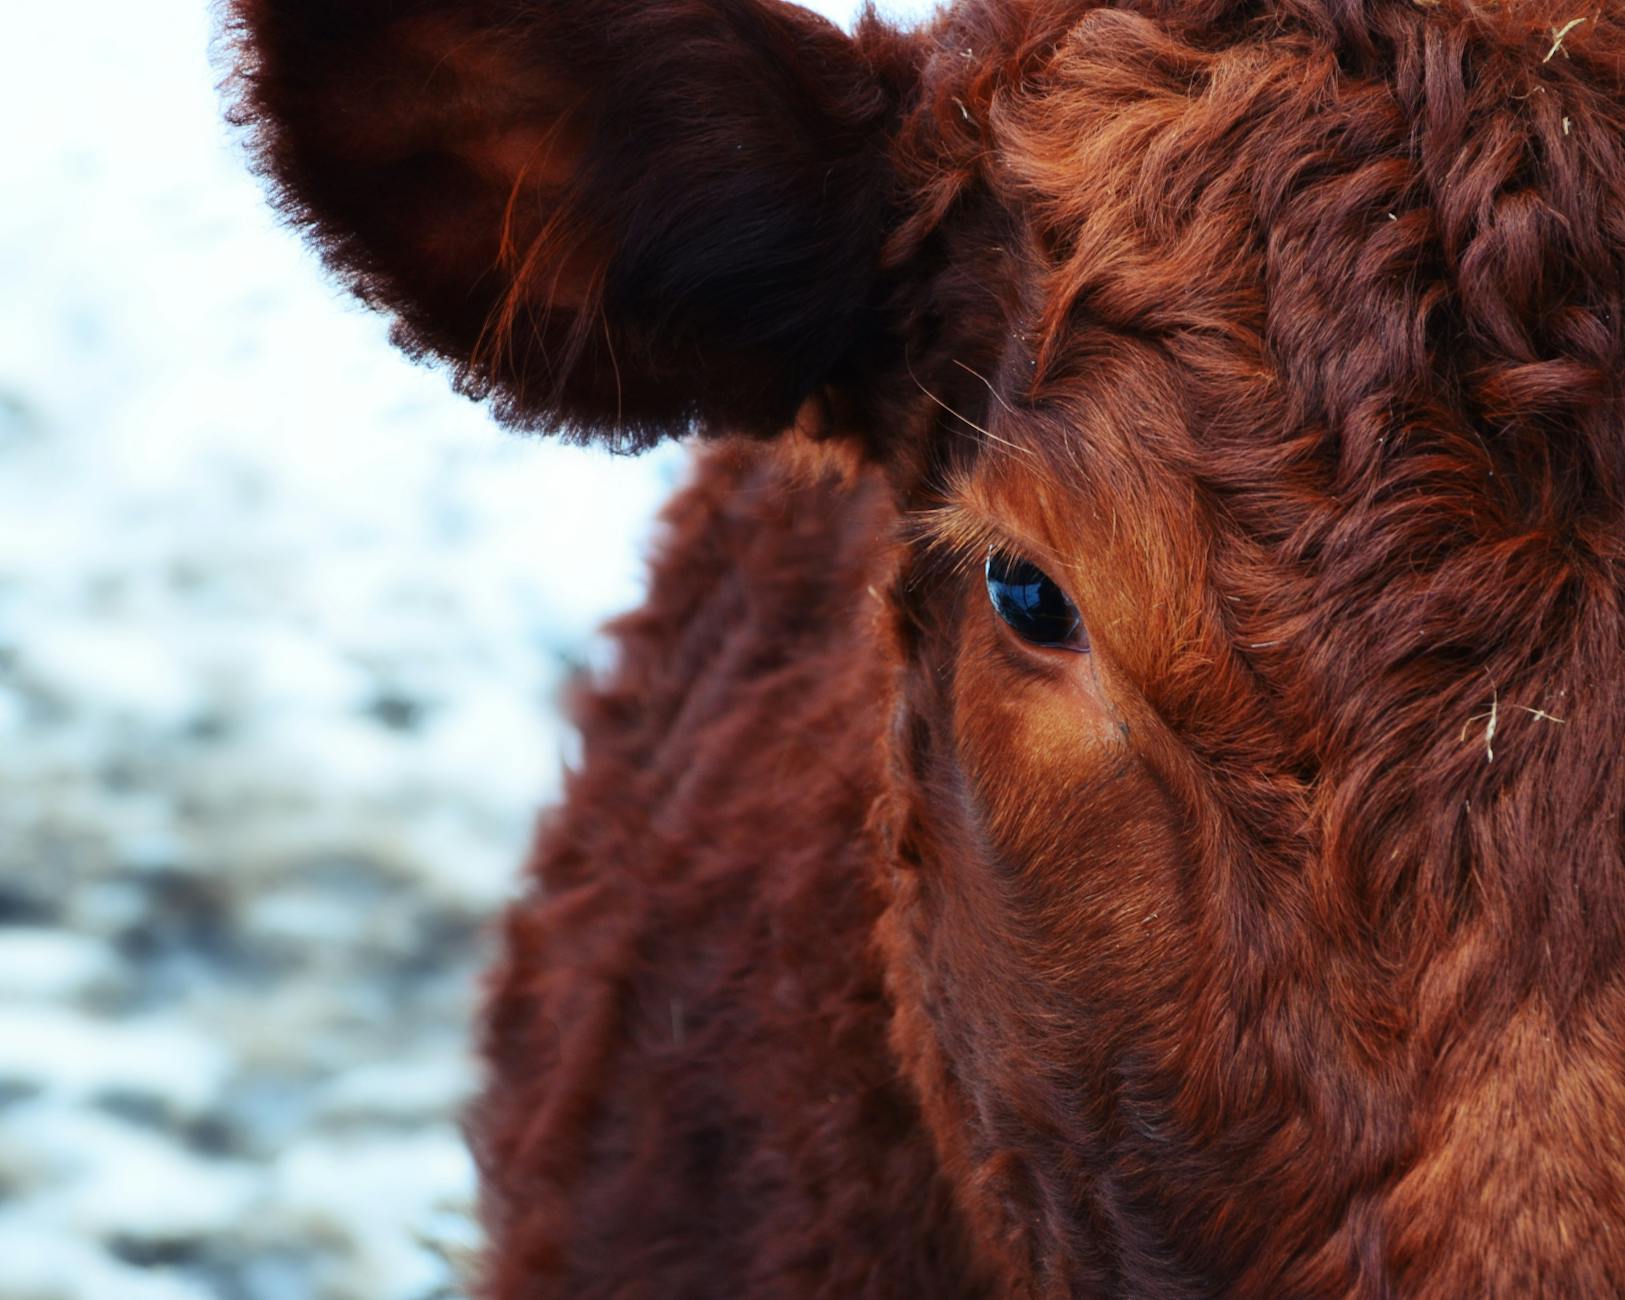 The Significance of Red Heifer in Jewish Tradition and End Times Prophecy